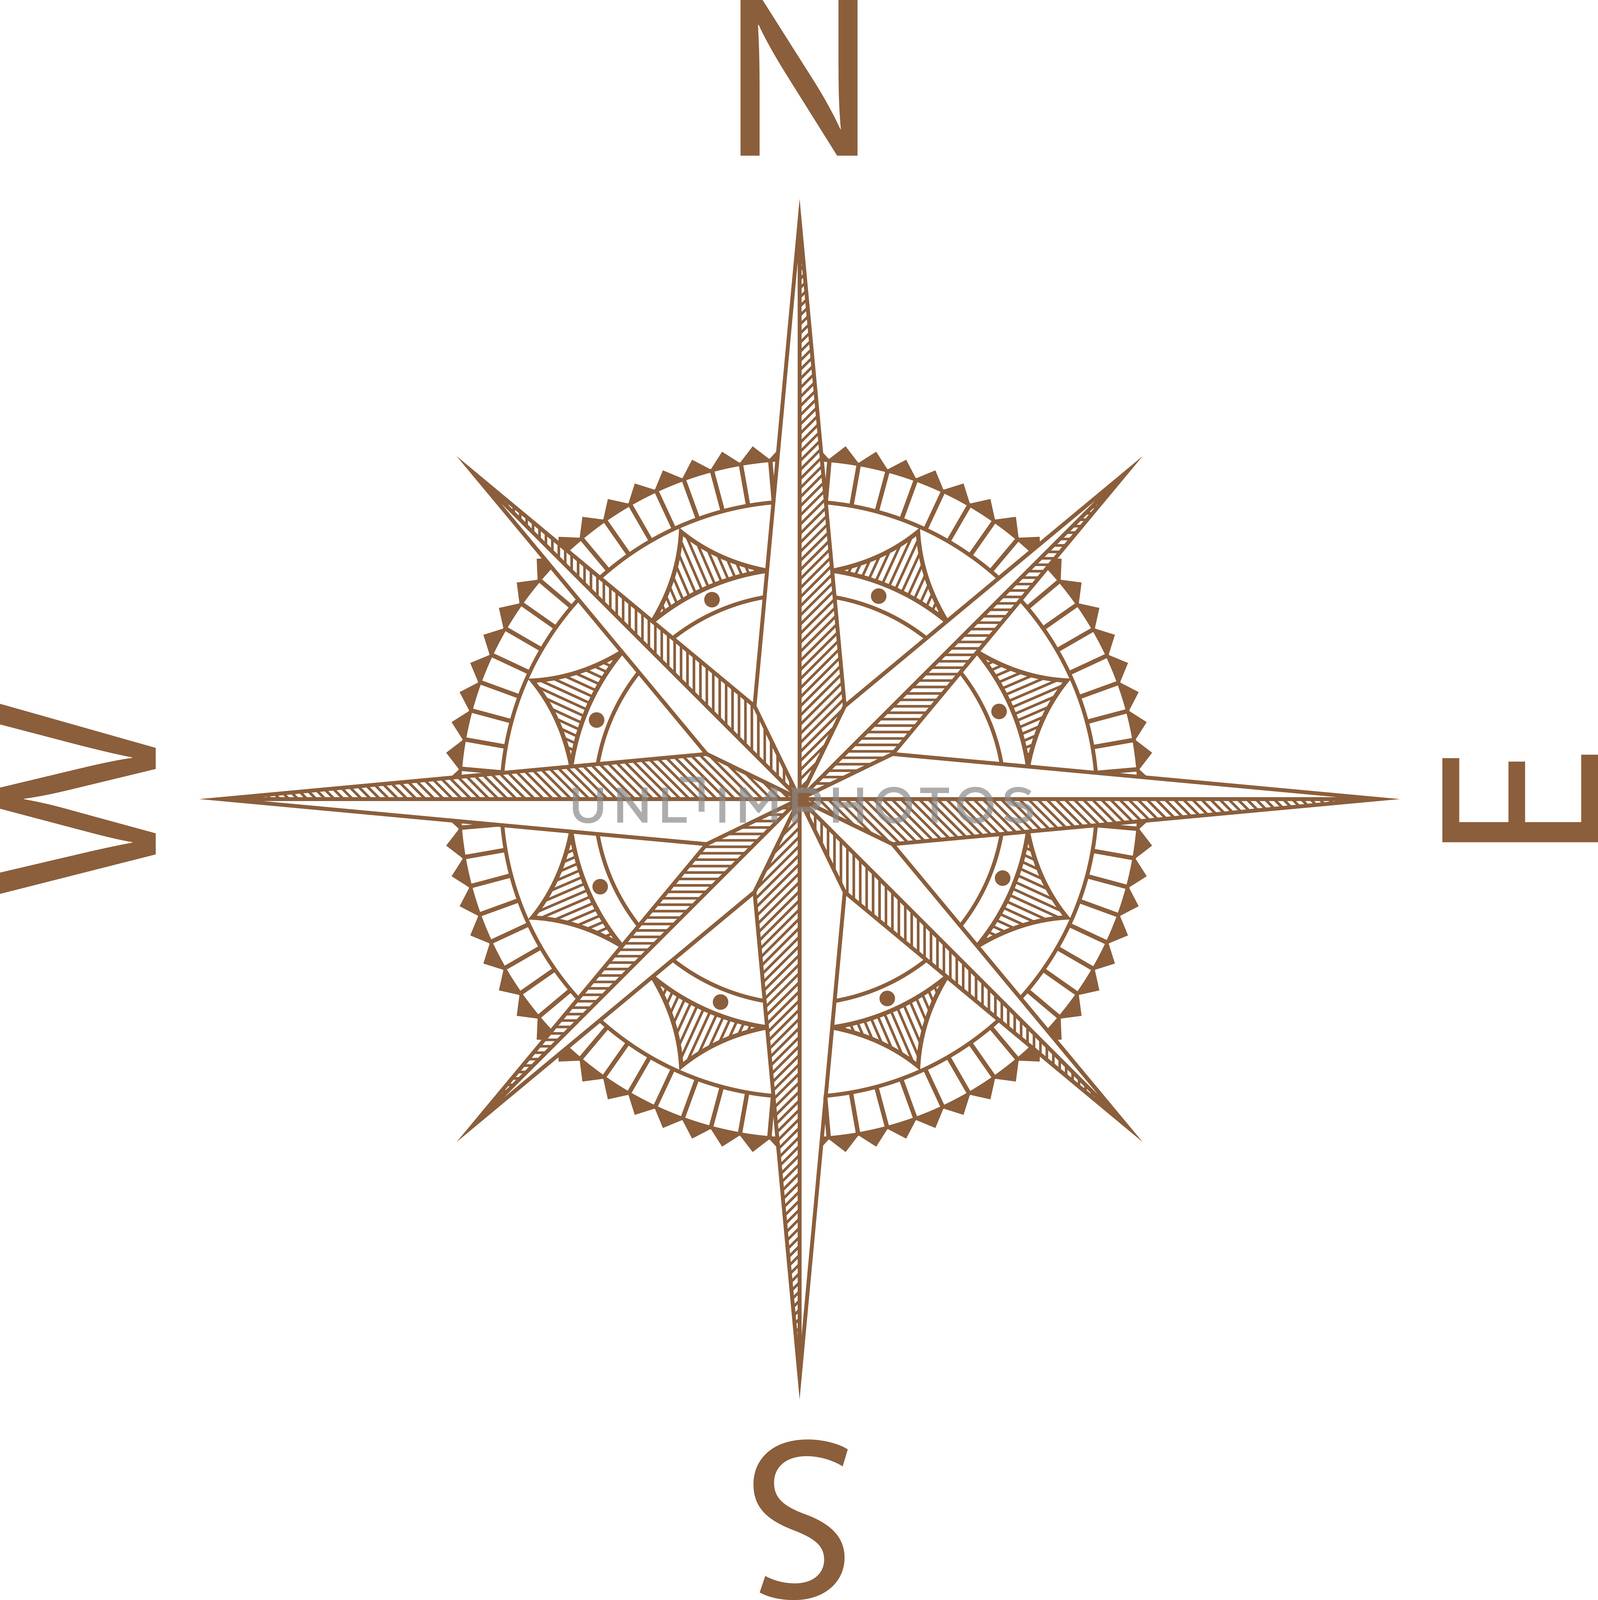 Illustration of a Map Compass on White Background by DragonEyeMedia